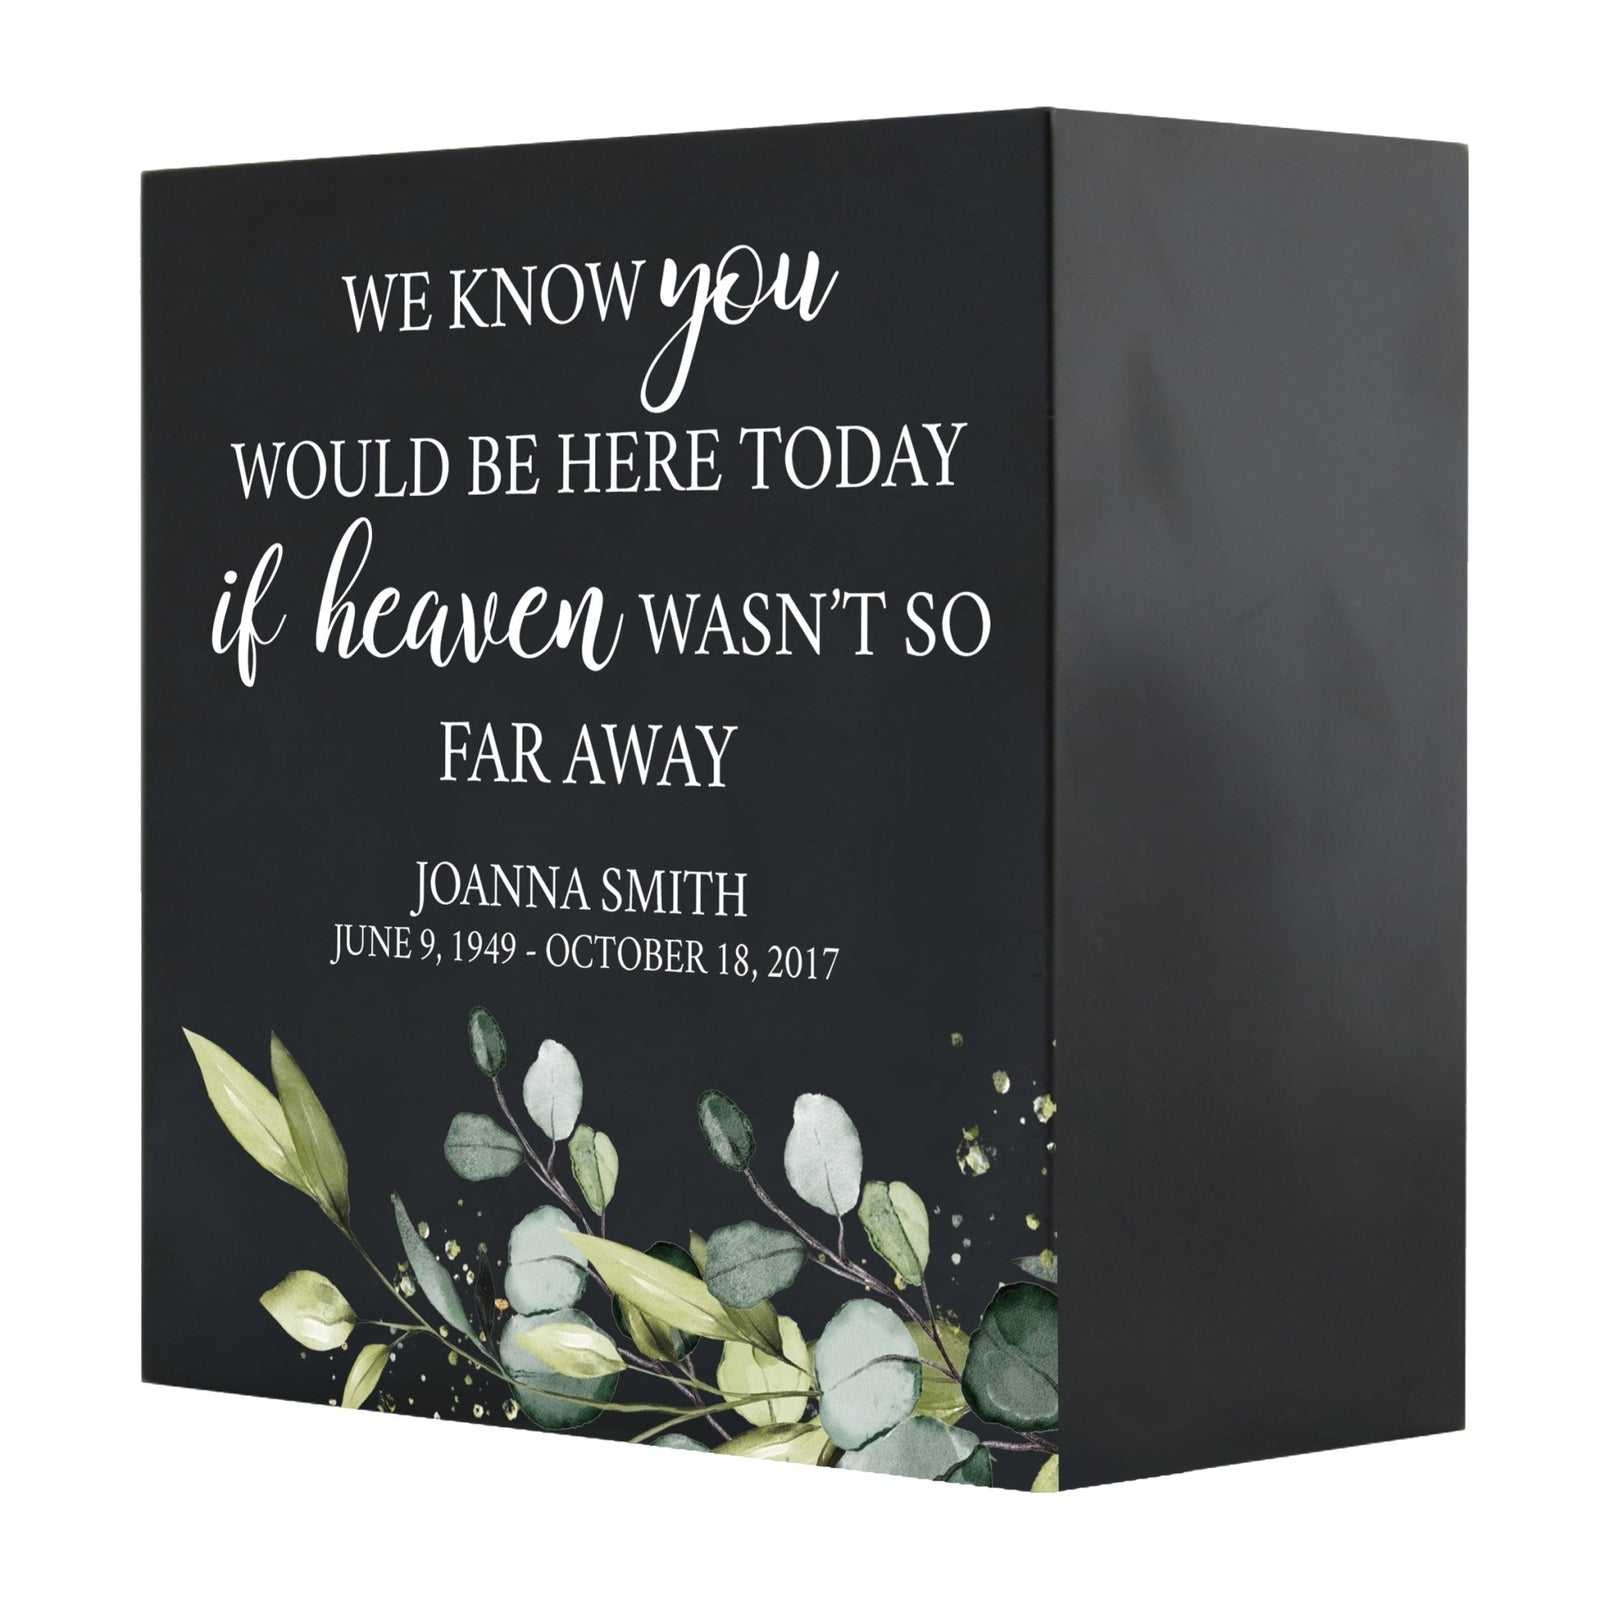 Personalized Modern Inspirational Memorial Wooden Shadow Box and Urn 6x6 holds 53 cu in of Human Ashes - We Know You Would (Heaven) - LifeSong Milestones